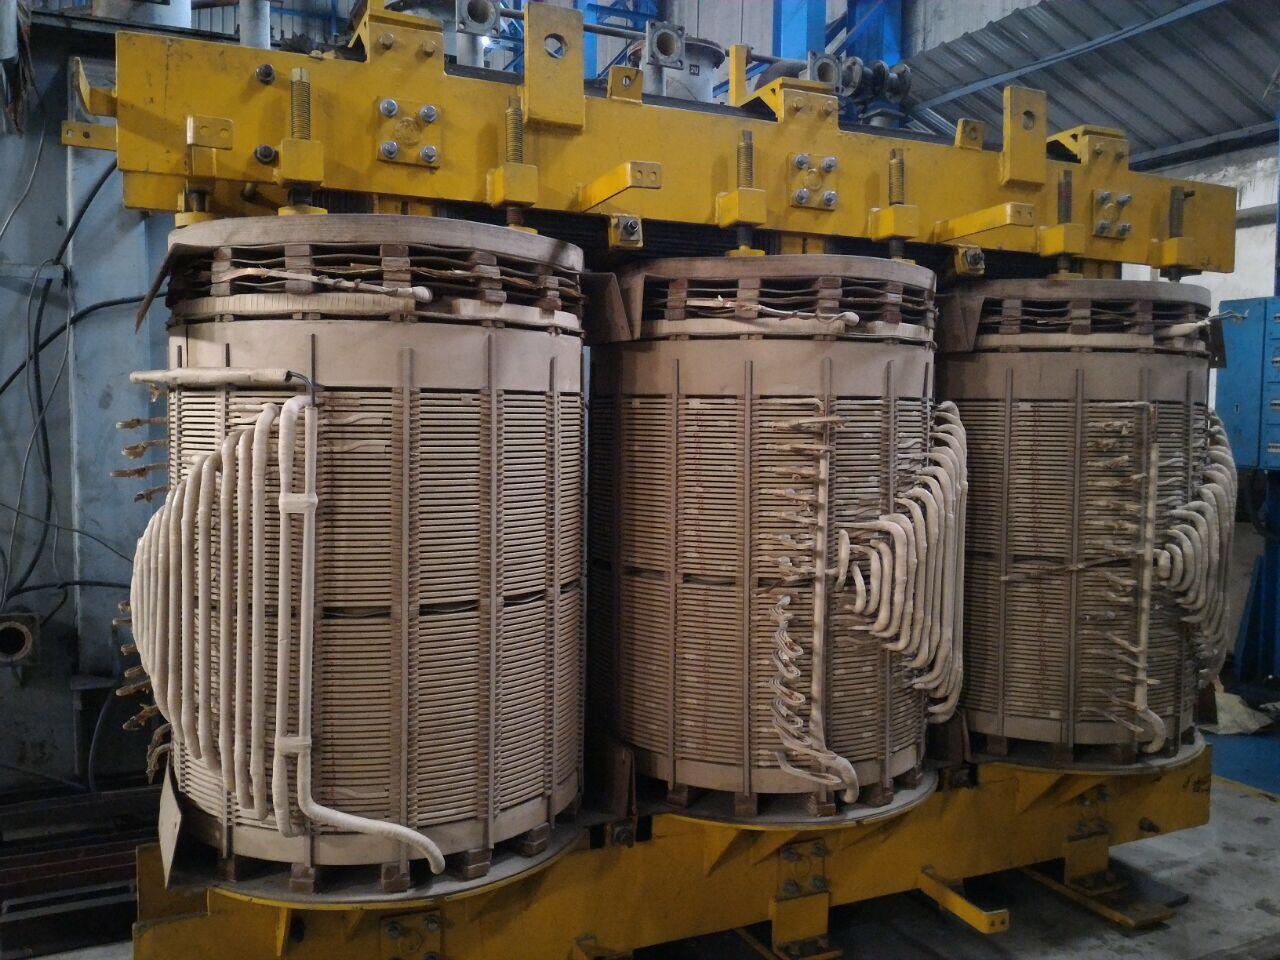 Difference Between Power Transformer and Distribution Transformer